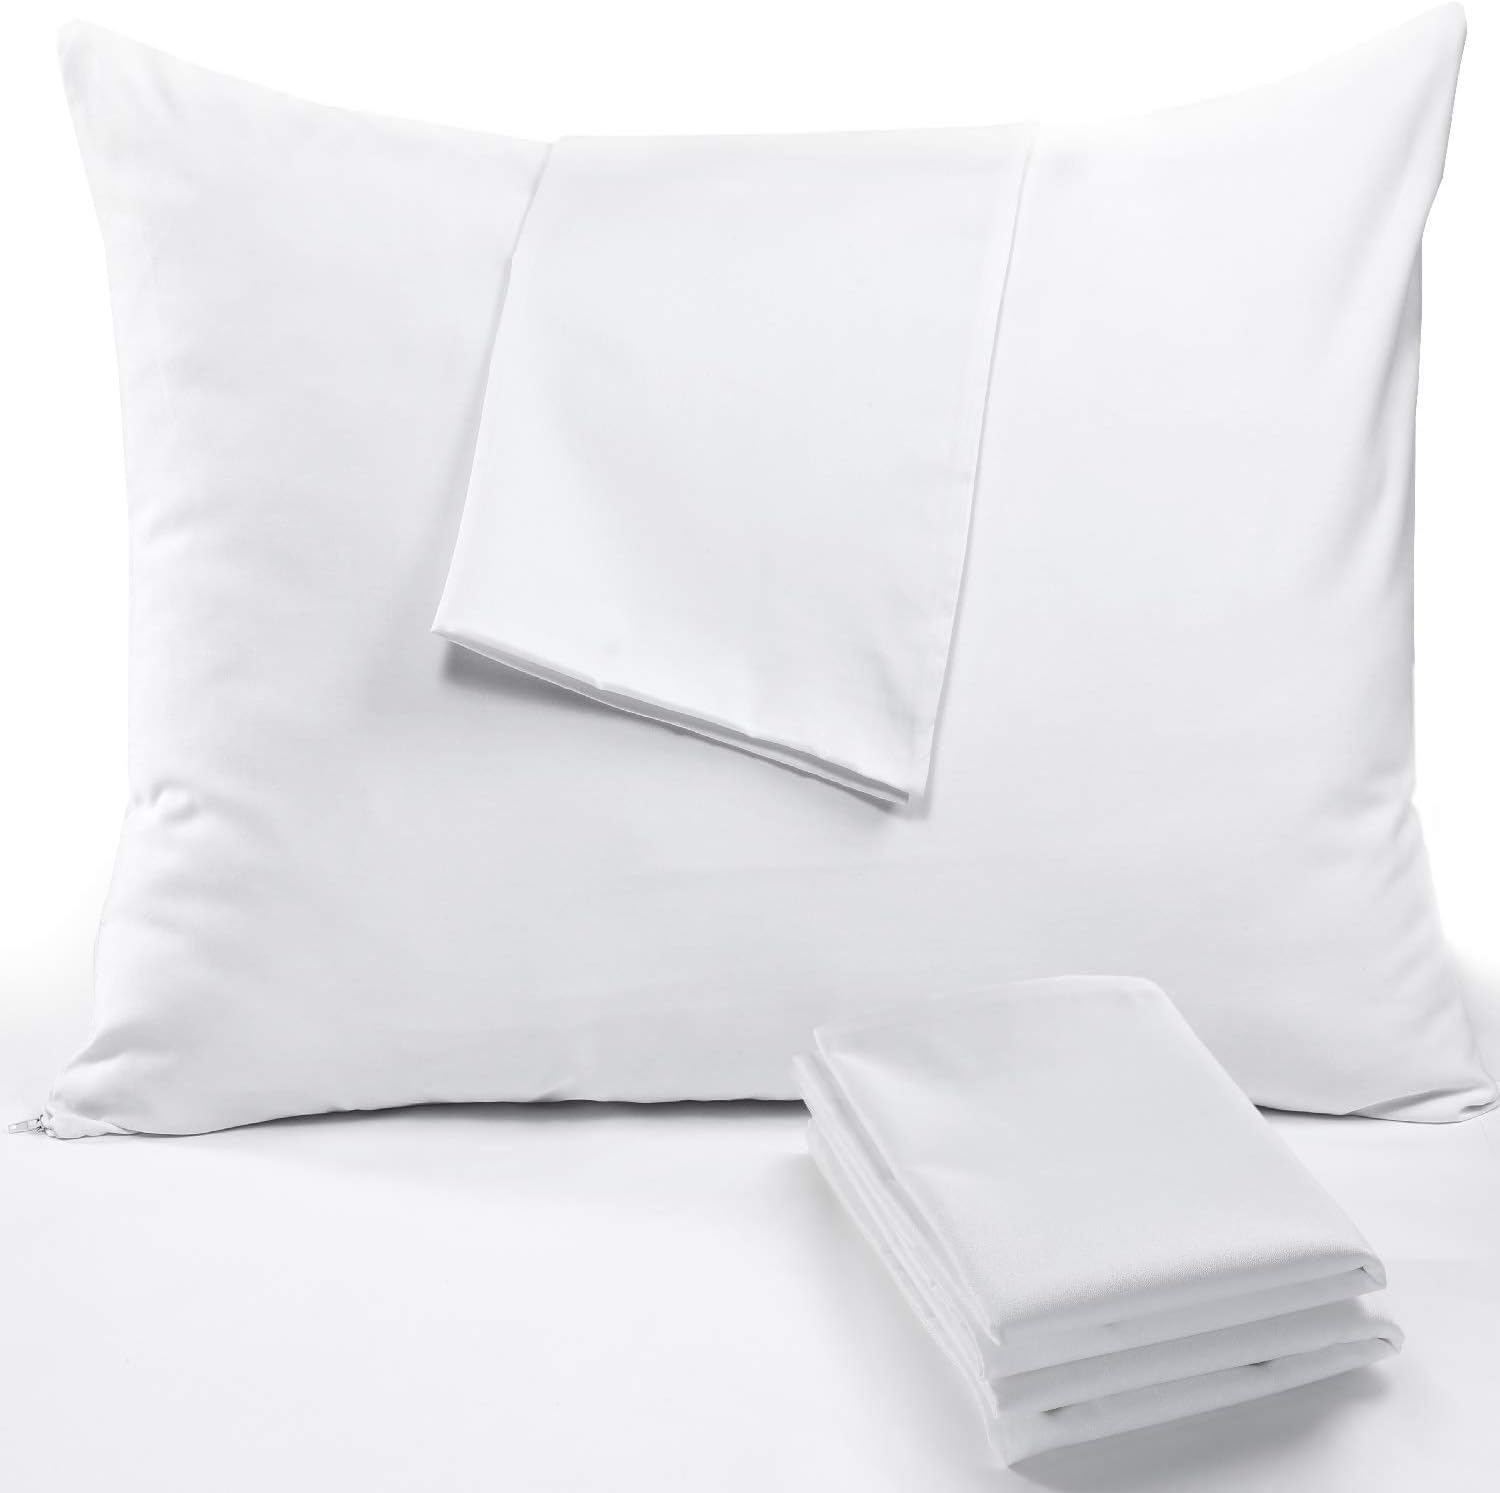 Pillow Cases Standard Queen 4 Pack Hemmed Premium White Pillow Covers 200 300 Thread Count Cotton Sateen Hotel Quality Soft Luxury Protectors Pack Anti Shrink Set of 4